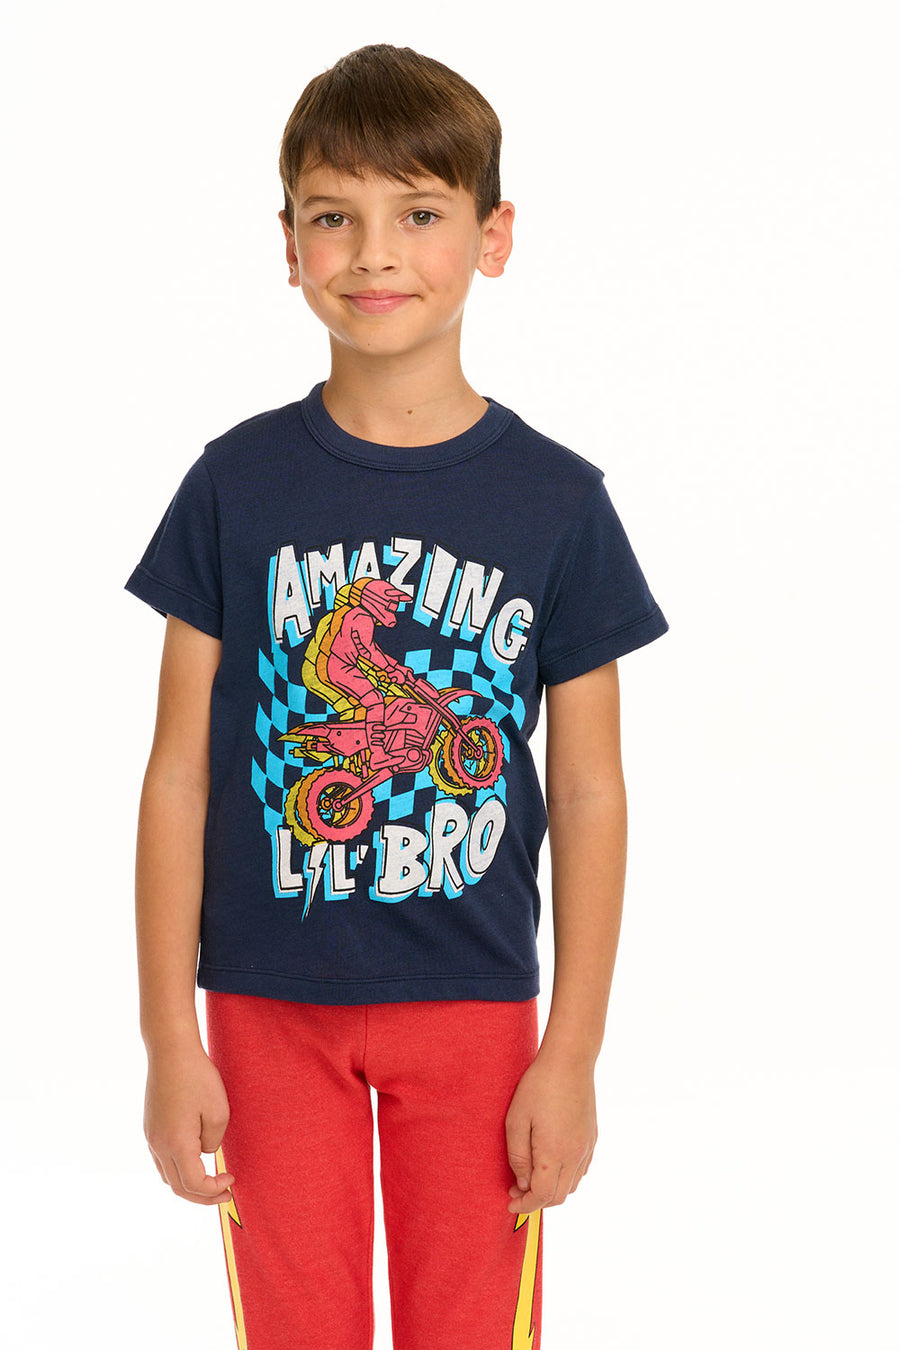 Amazing Lil' Bro Tee BOYS chaserbrand